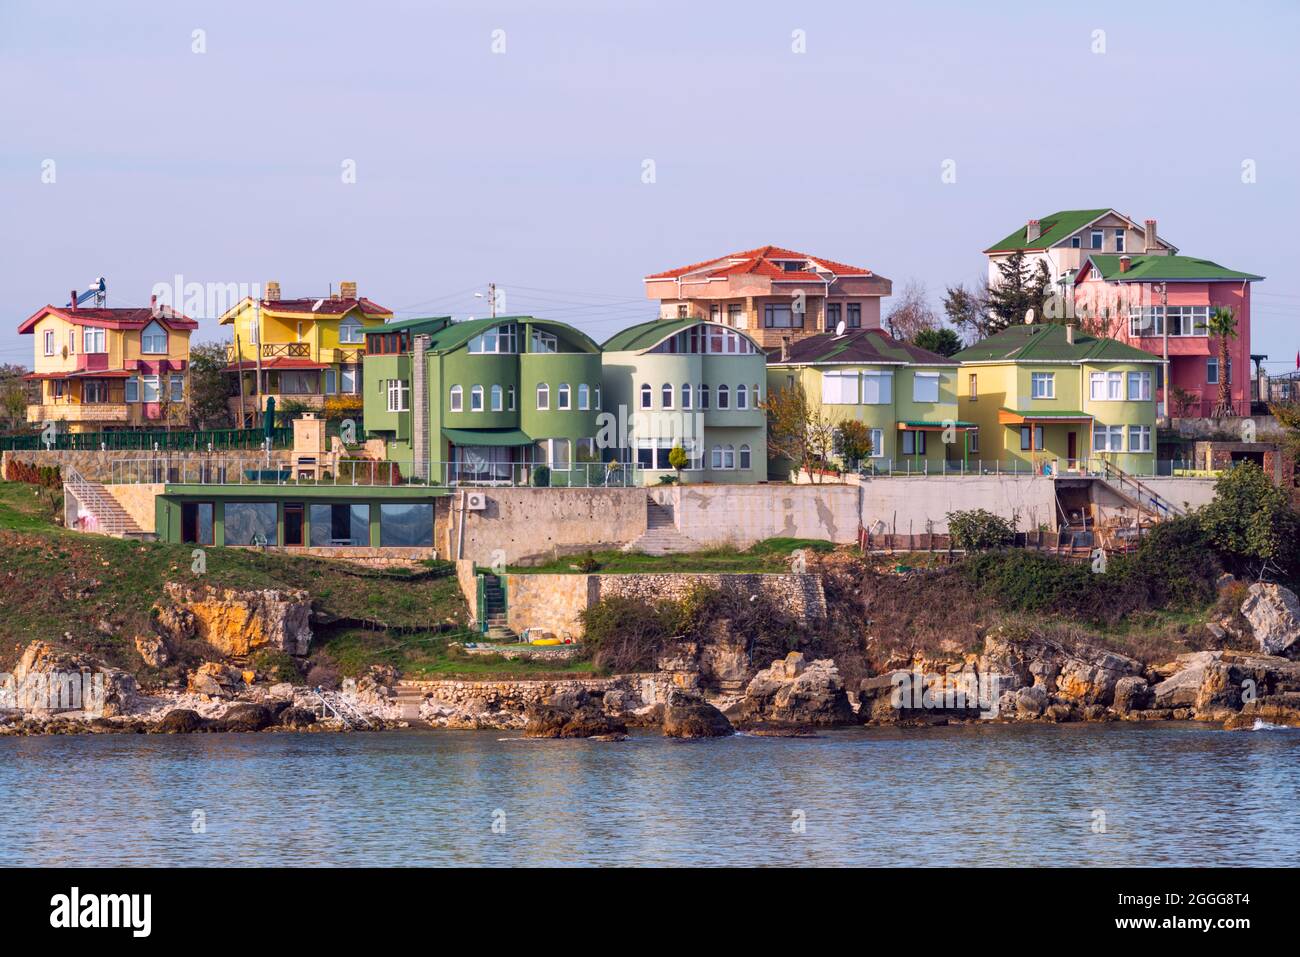 Colorful detached houses on the shores of the Black Sea in Turkey. Stock Photo